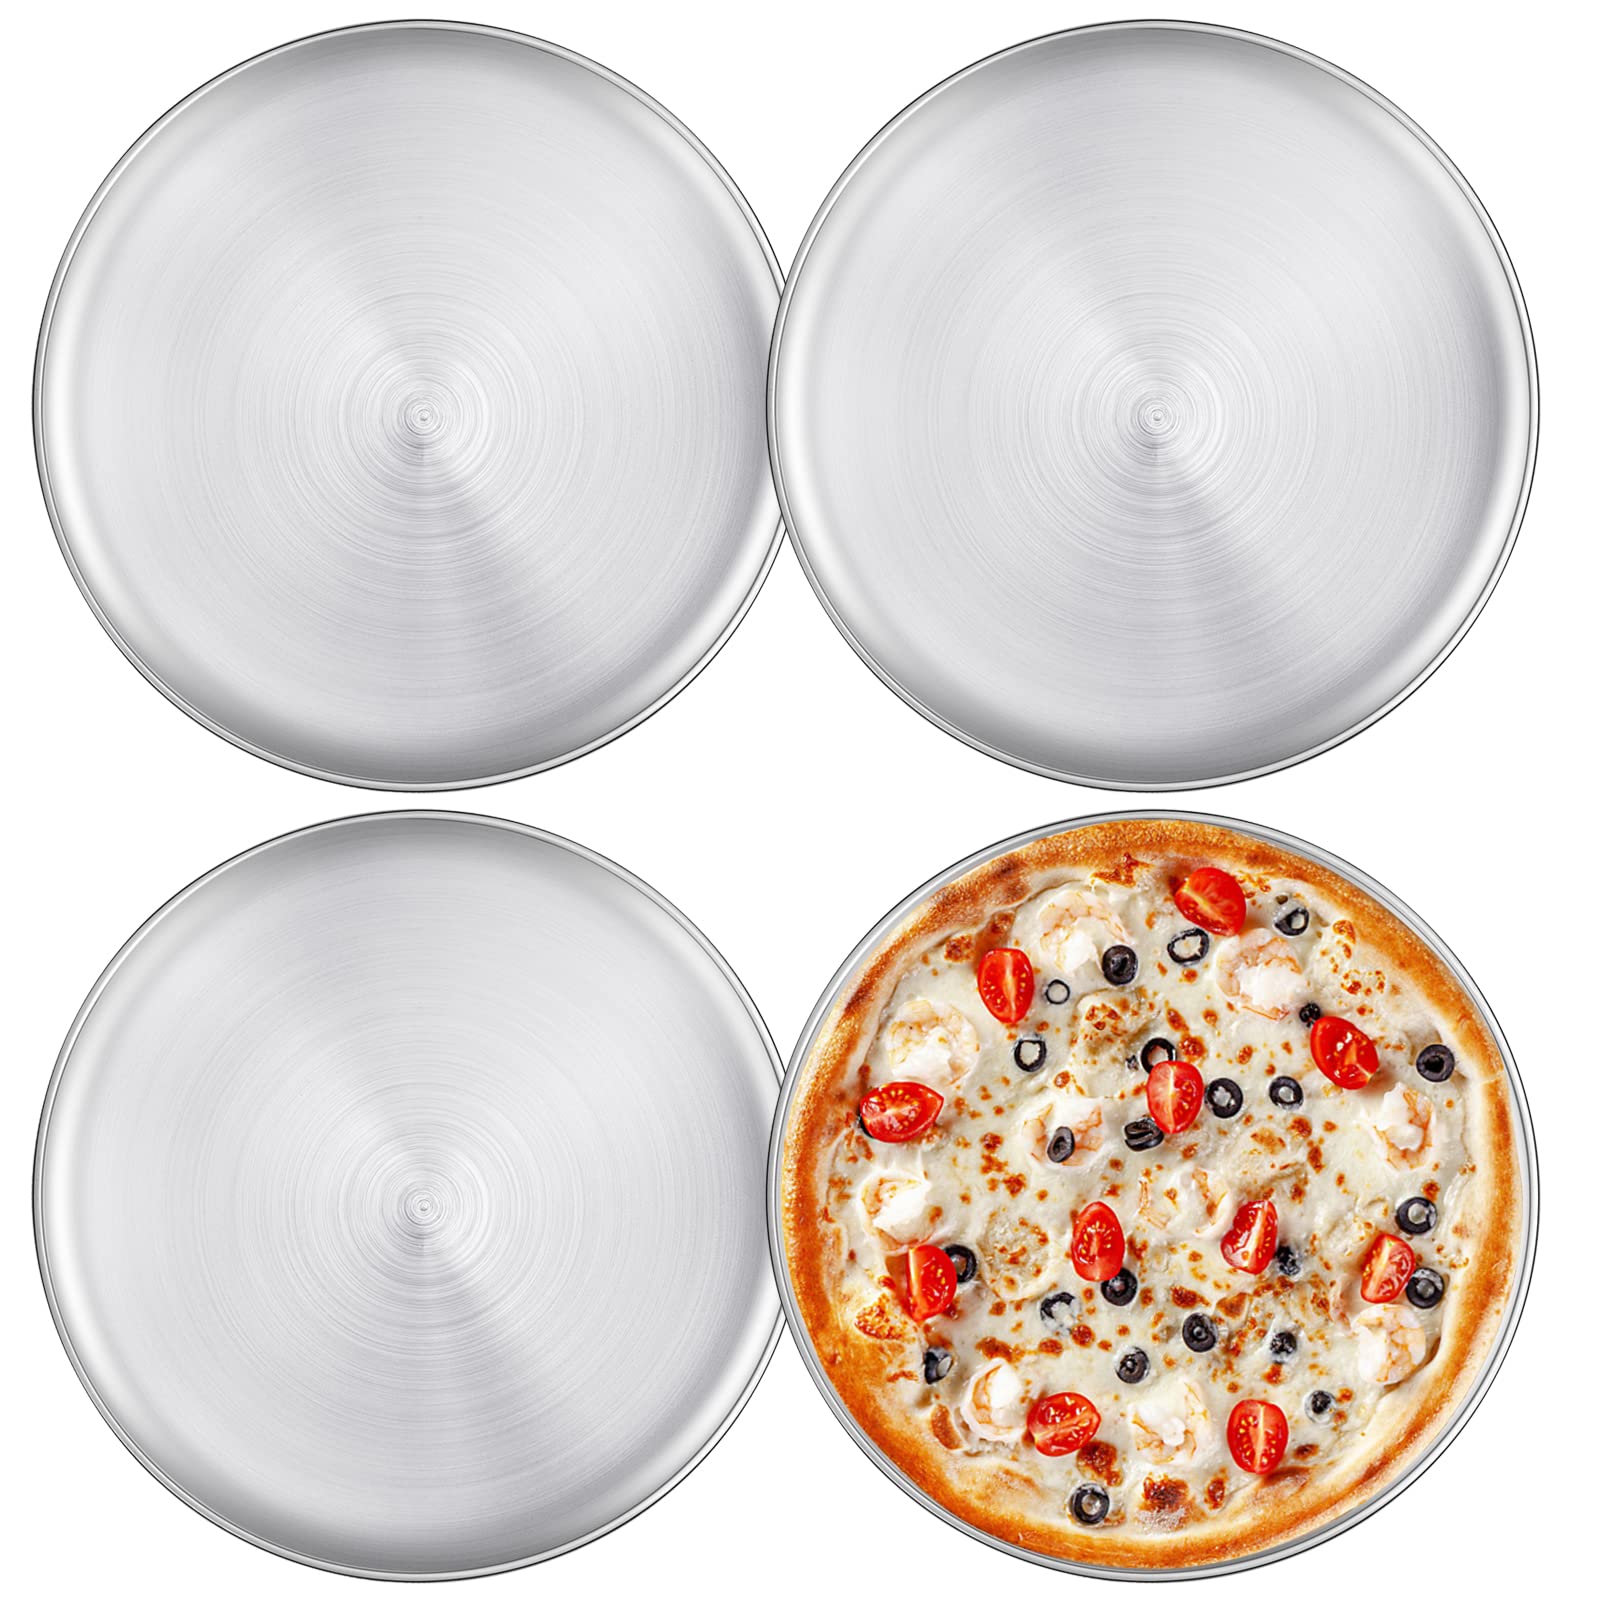 Worldity Pizza Serving Tray, 12 Inch Stainless Steel Pizza Pan, Food Grade Safe Pizza Pans, Round Pizza Tray for Oven, Pizza Plate for Pie, Cookie, Dishwasher Safe(4 Pack)